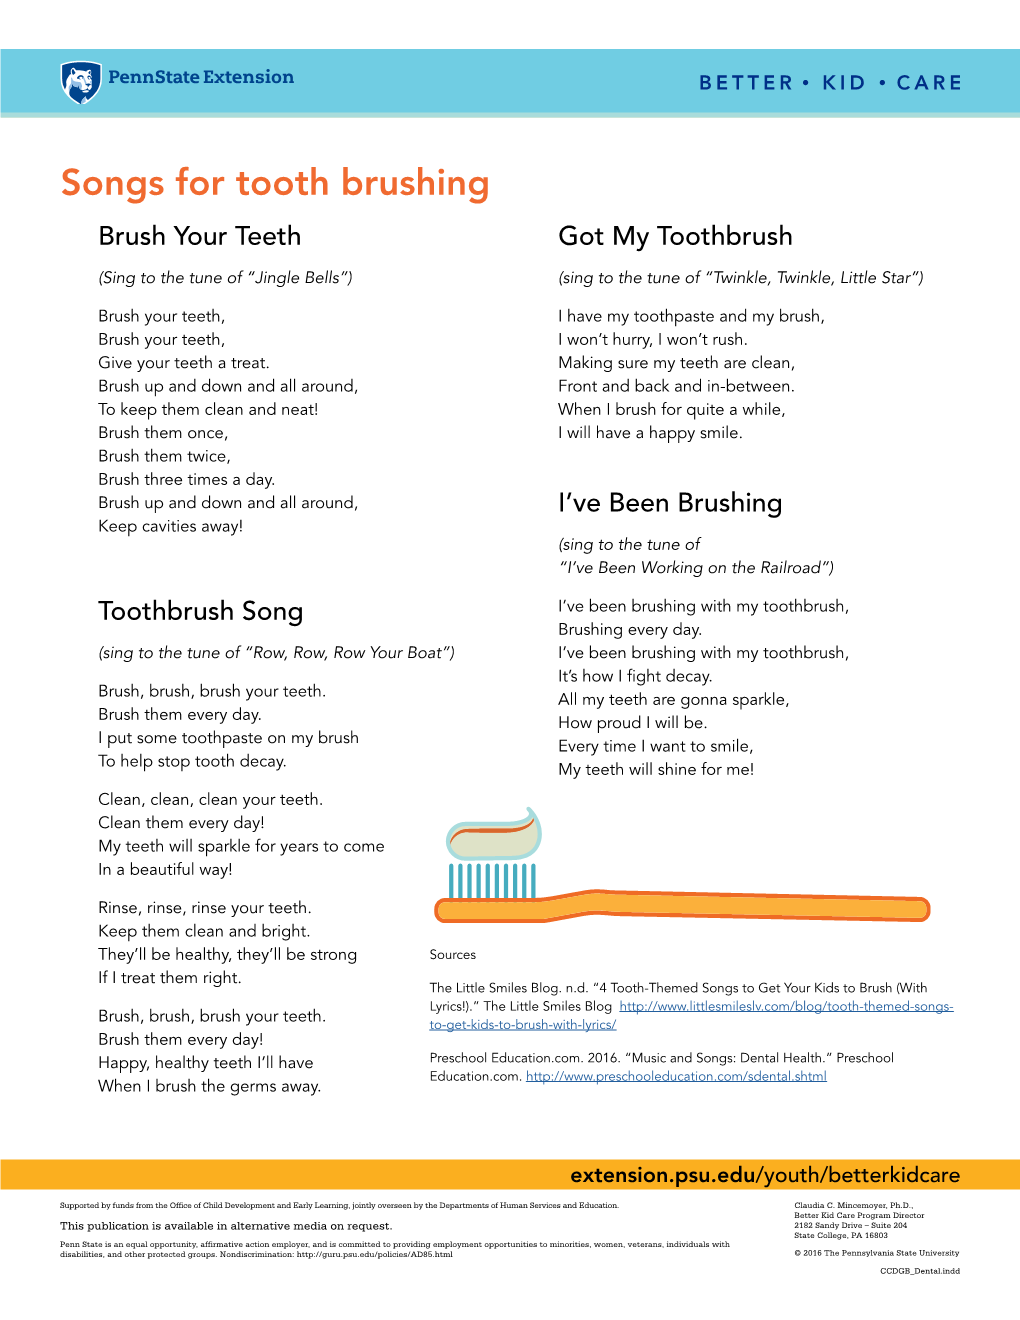 Songs for Tooth Brushing Brush Your Teeth Got My Toothbrush (Sing to the Tune of “Jingle Bells”) (Sing to the Tune of “Twinkle, Twinkle, Little Star”)